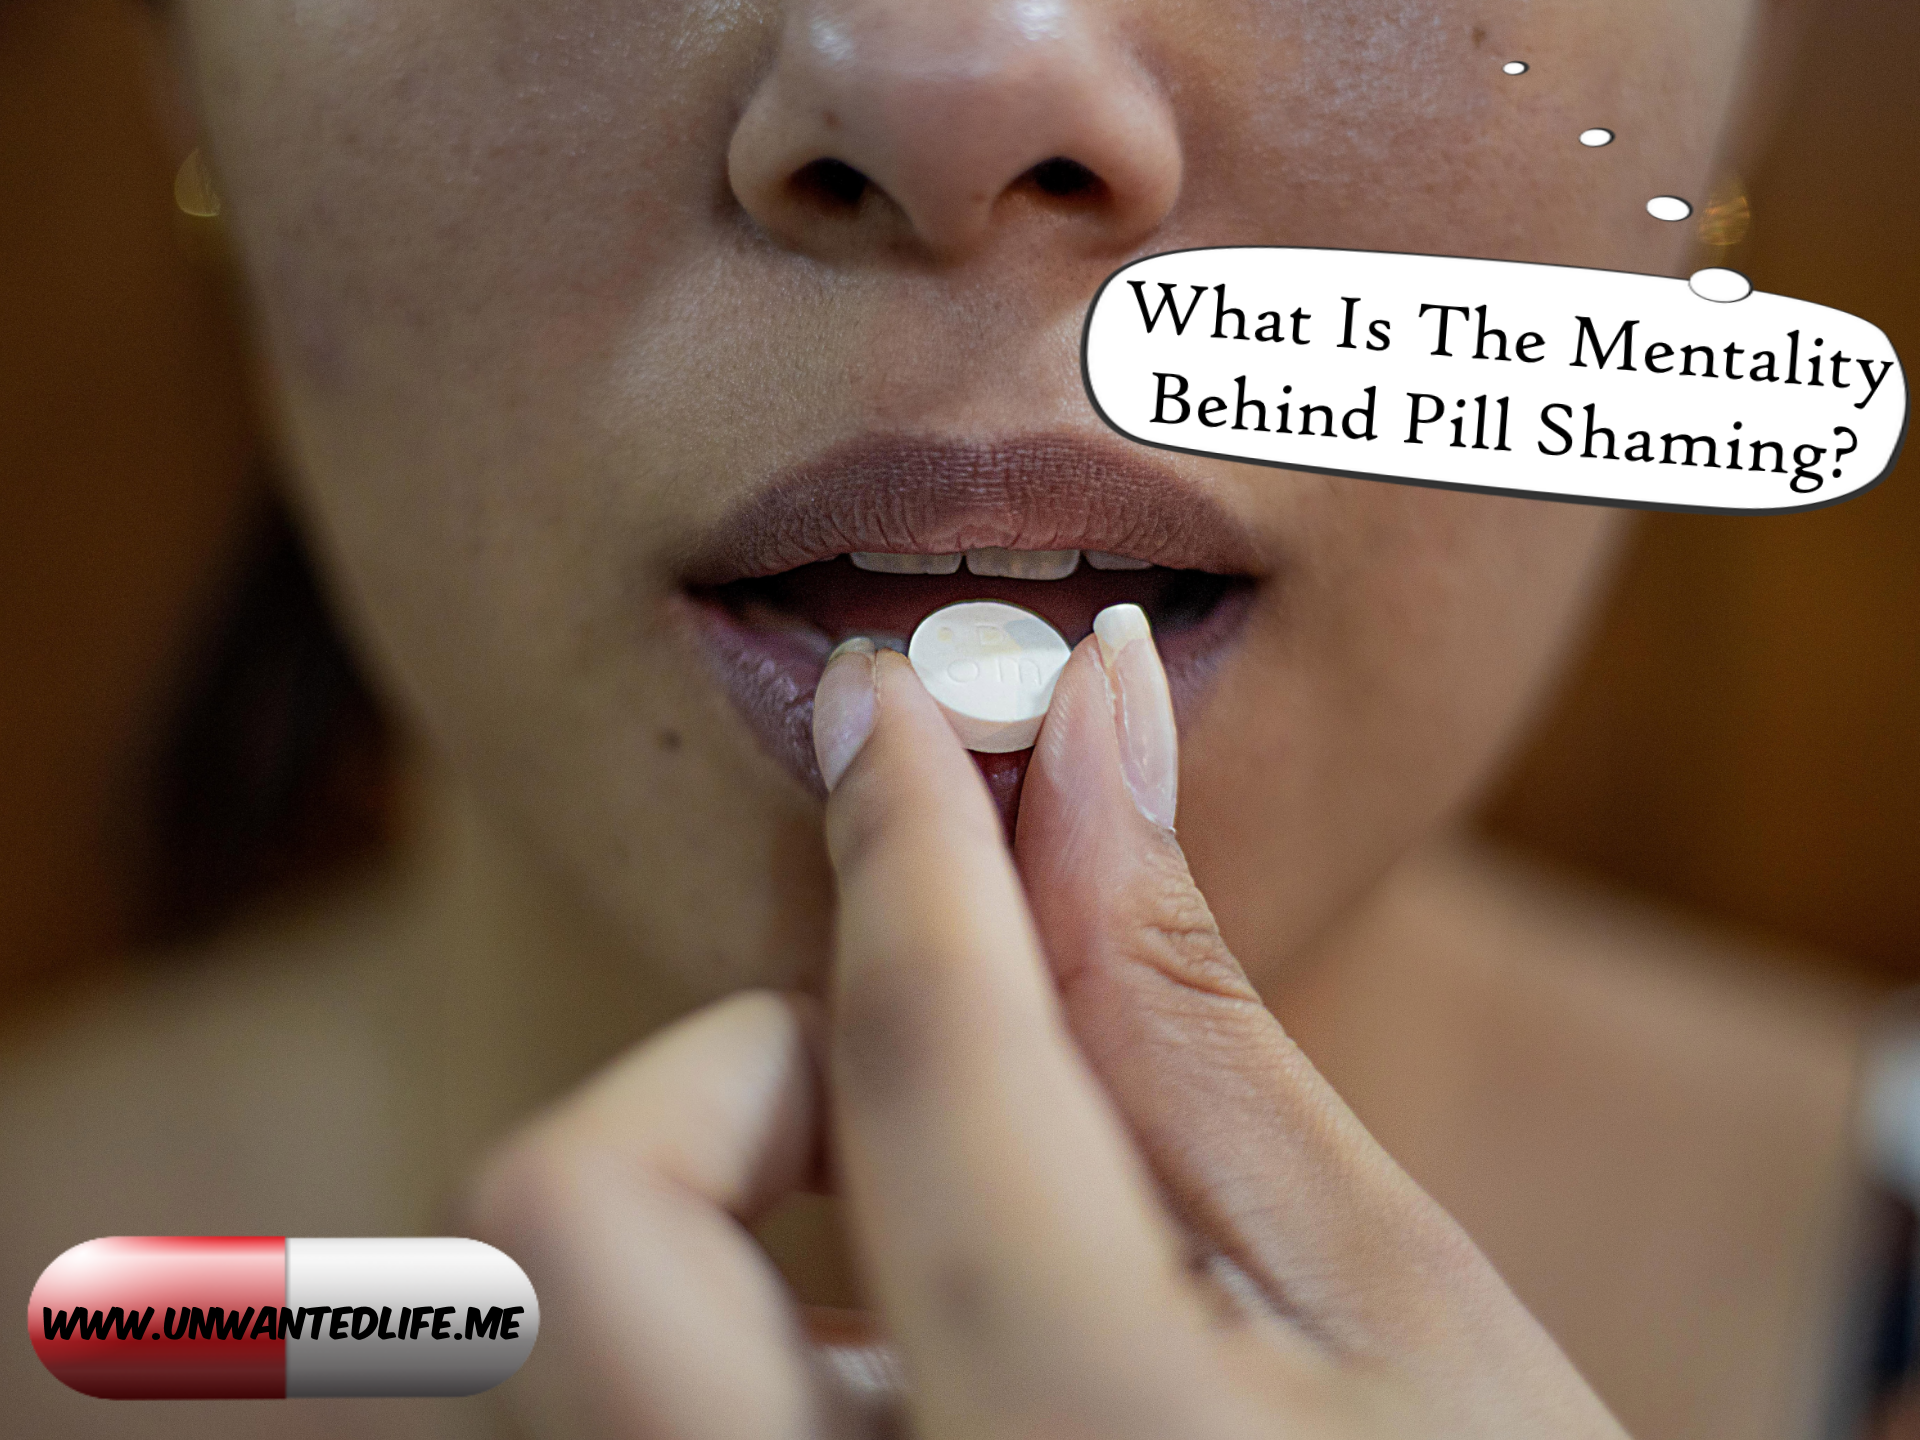 A picture of a woman taking medication with a thought bubble that says - What Is The Mentality Behind Pill Shaming?